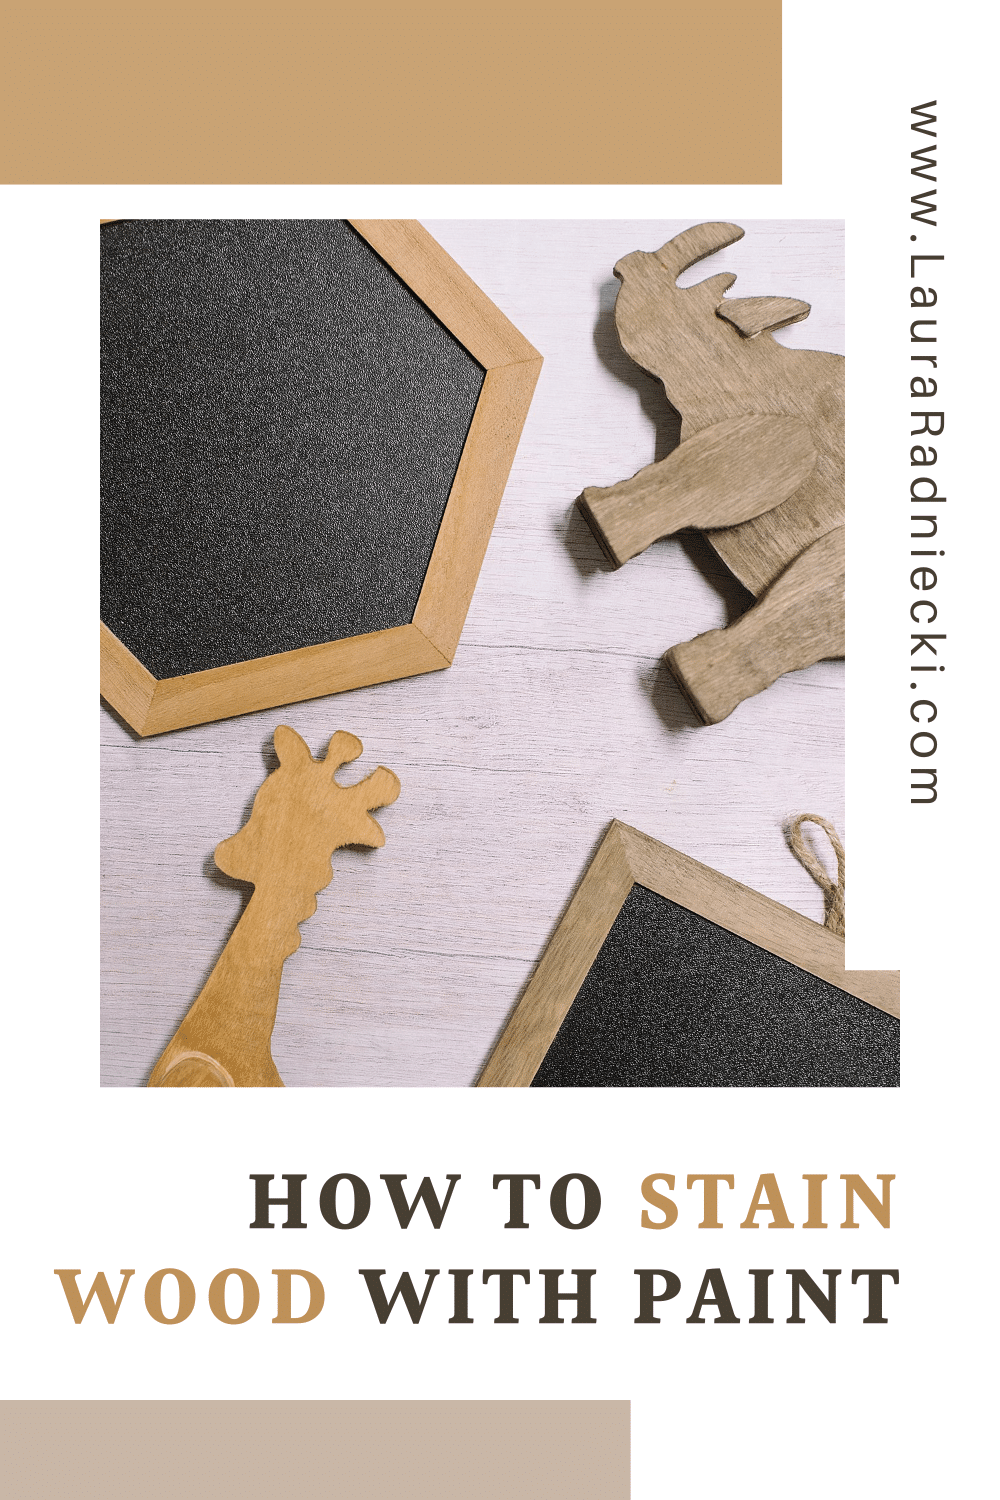 How to Stain Wood with Paint